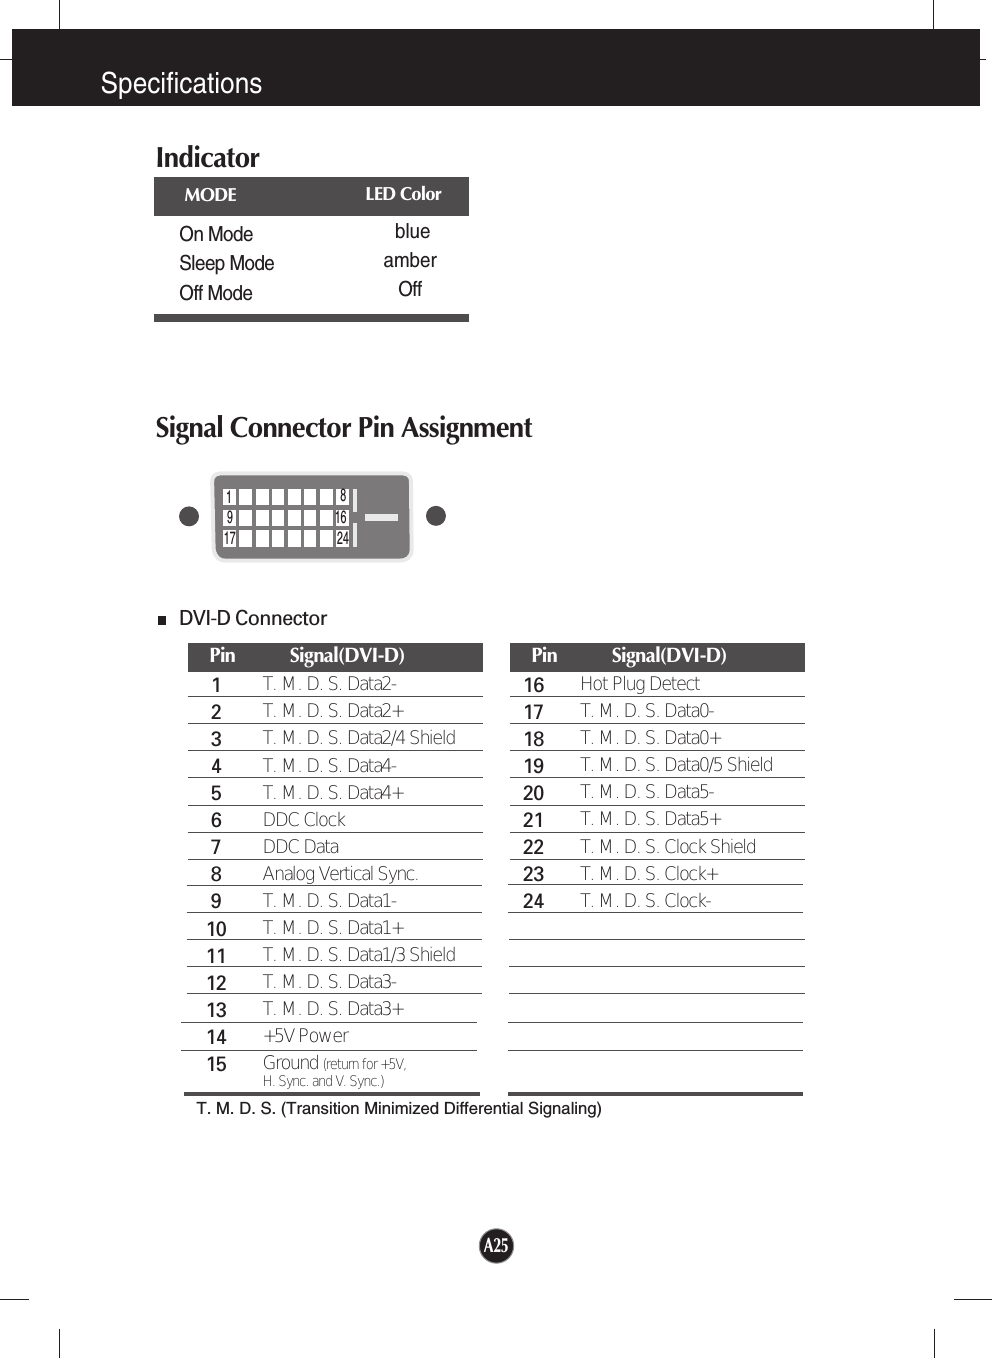 A25Signal Connector Pin Assignment18917 2416Pin           Signal(DVI-D)123456789101112131415T. M. D. S. Data2-T. M. D. S. Data2+T. M. D. S. Data2/4 ShieldT. M. D. S. Data4-T. M. D. S. Data4+DDC ClockDDC DataAnalog Vertical Sync.T. M. D. S. Data1-T. M. D. S. Data1+T. M. D. S. Data1/3 ShieldT. M. D. S. Data3-T. M. D. S. Data3++5V PowerGround (return for +5V, H. Sync. and V. Sync.)Pin           Signal(DVI-D)161718192021222324Hot Plug DetectT. M. D. S. Data0-T. M. D. S. Data0+T. M. D. S. Data0/5 ShieldT. M. D. S. Data5-T. M. D. S. Data5+T. M. D. S. Clock ShieldT. M. D. S. Clock+T. M. D. S. Clock-T. M. D. S. (Transition Minimized Differential Signaling)DVI-D Connector SpecificationsIndicatorOn ModeSleep ModeOff ModeblueamberOffLED ColorMODE